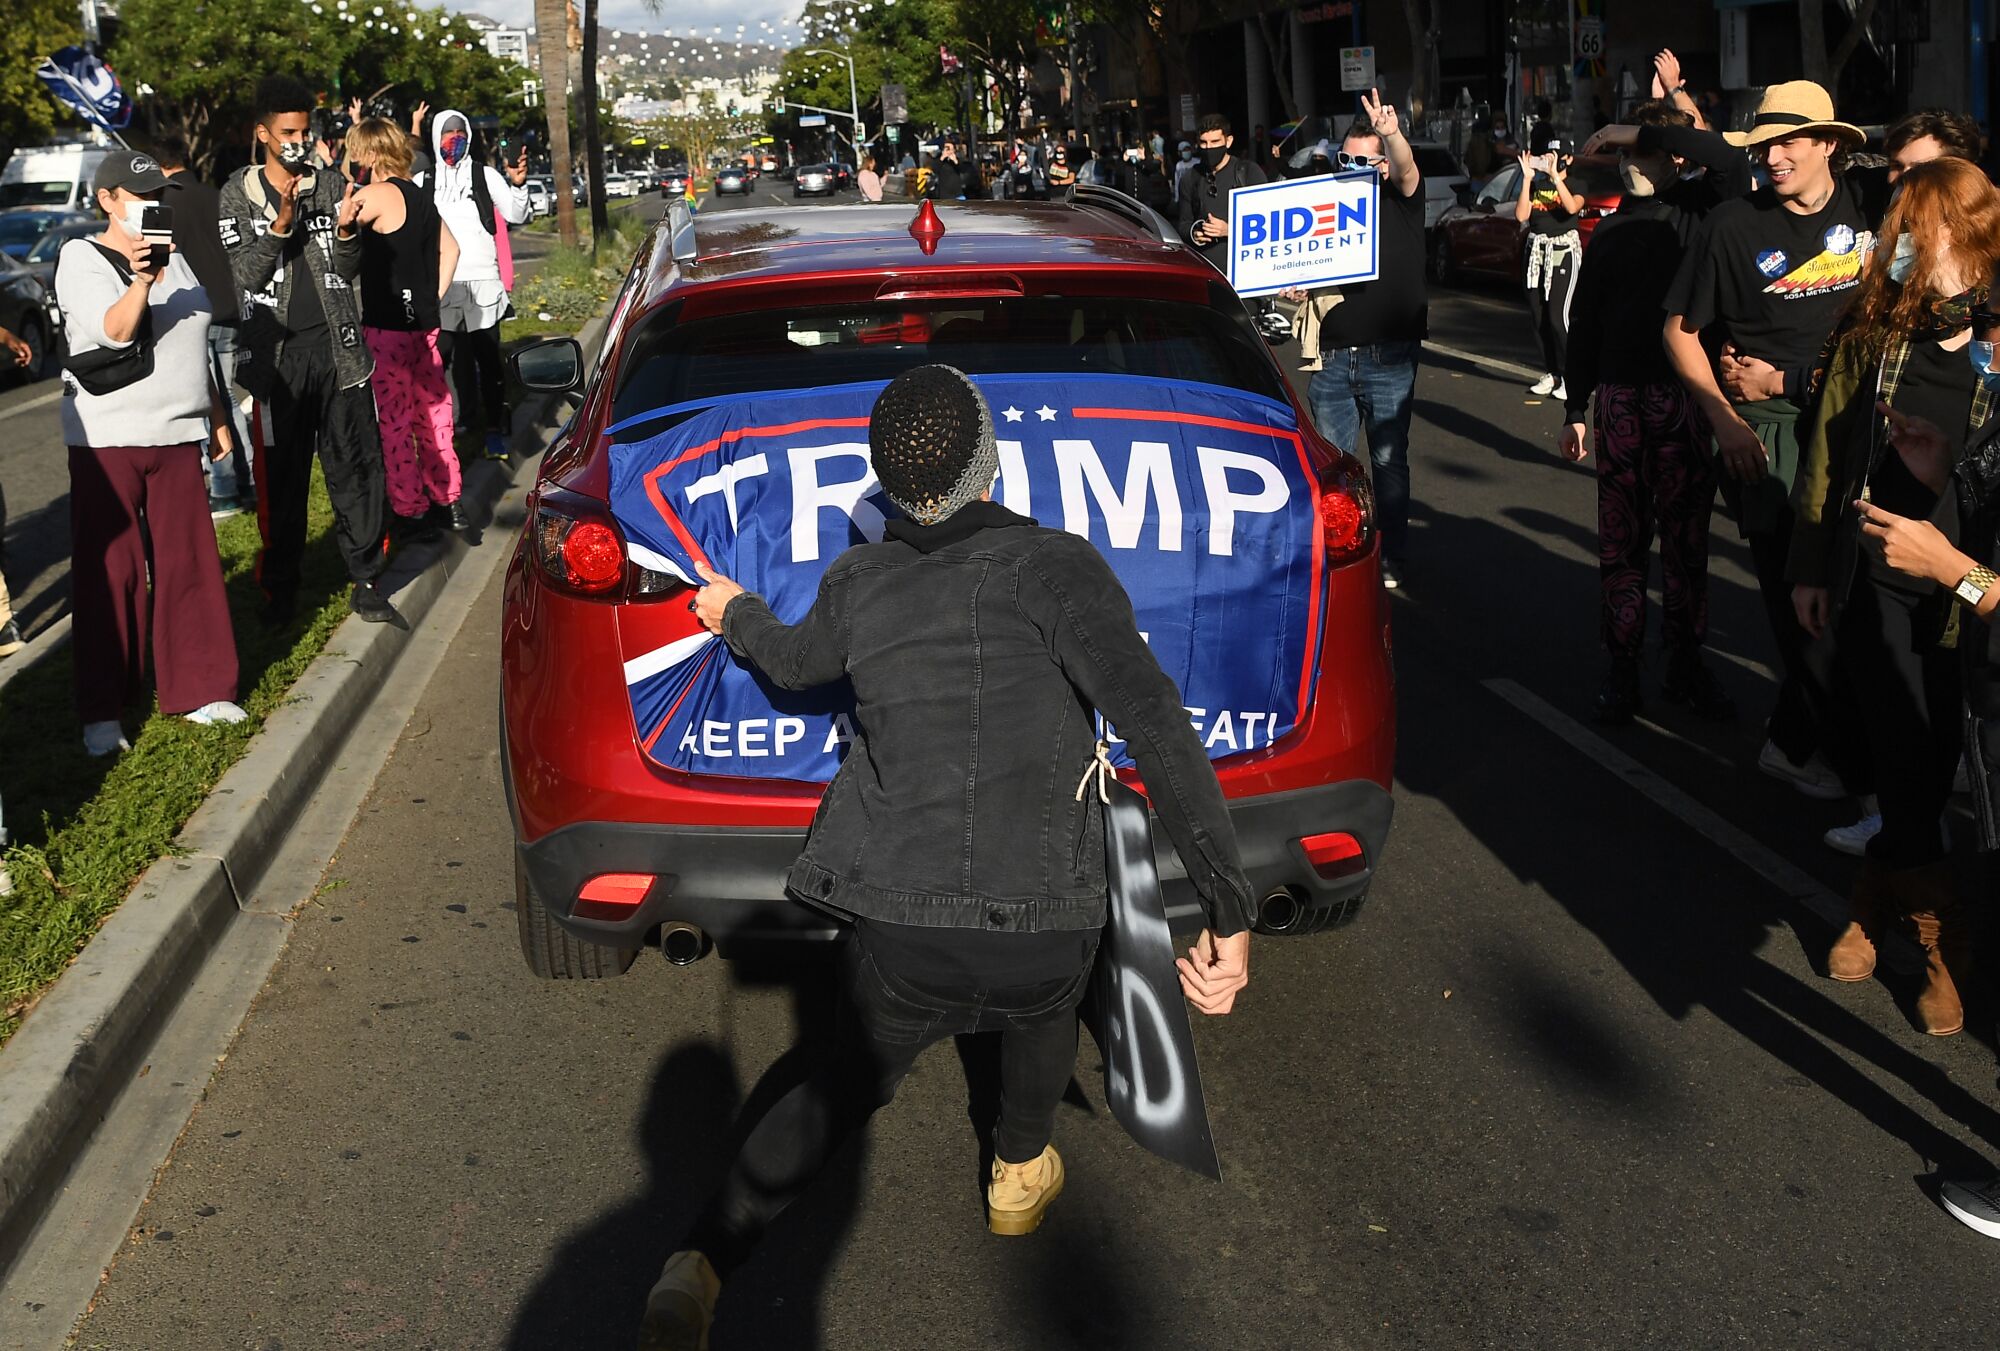 A Trump flag is ripped off a car in West Hollywood.